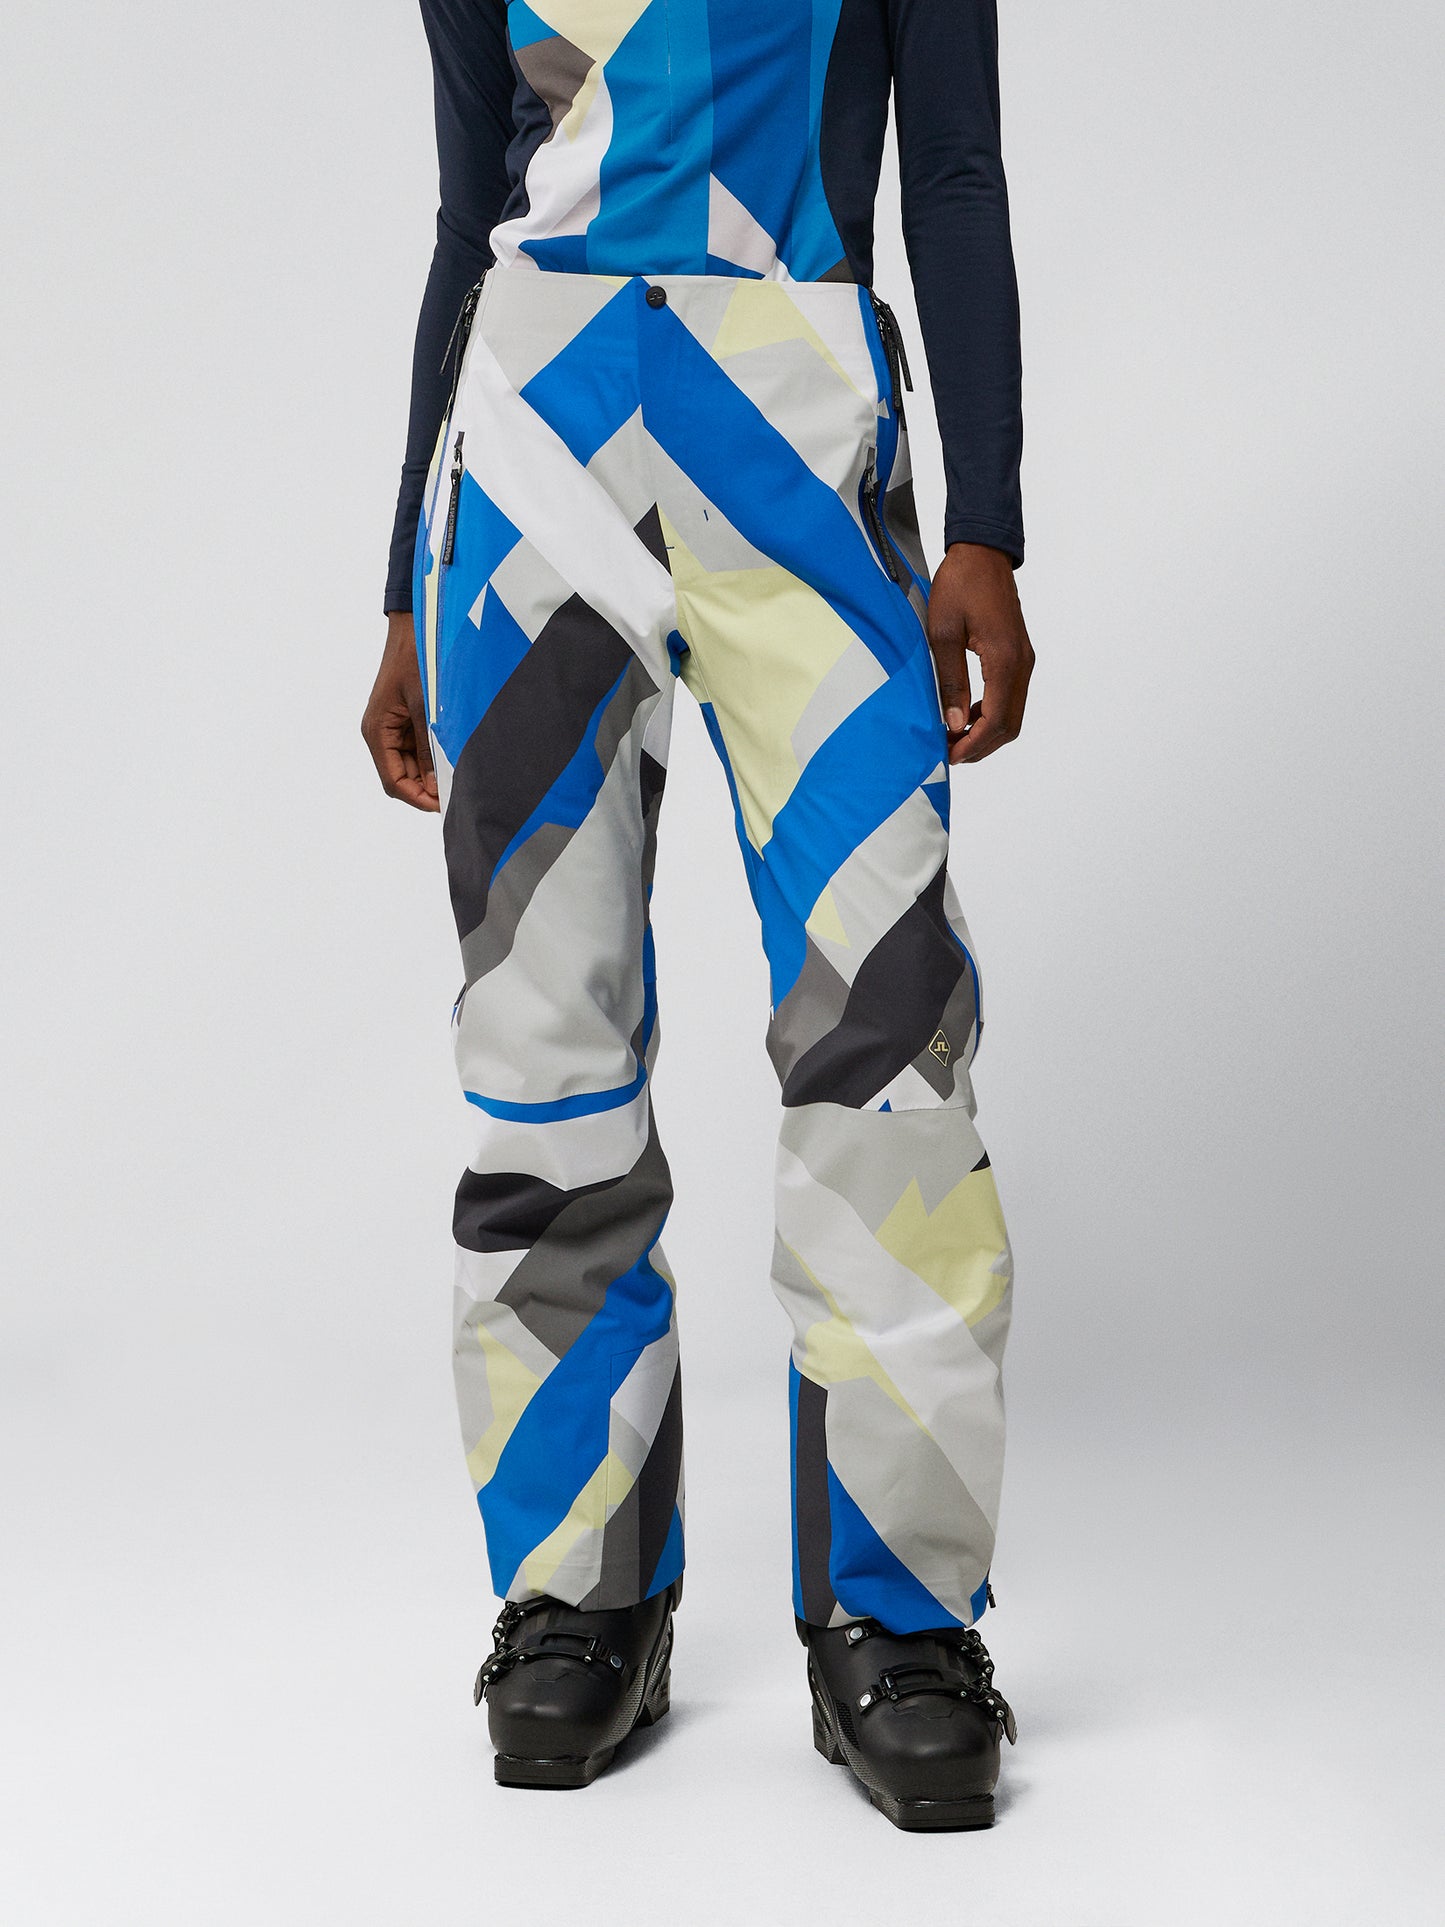 W Aerial Shell Pant PRINT / Grey Flag Patchwork